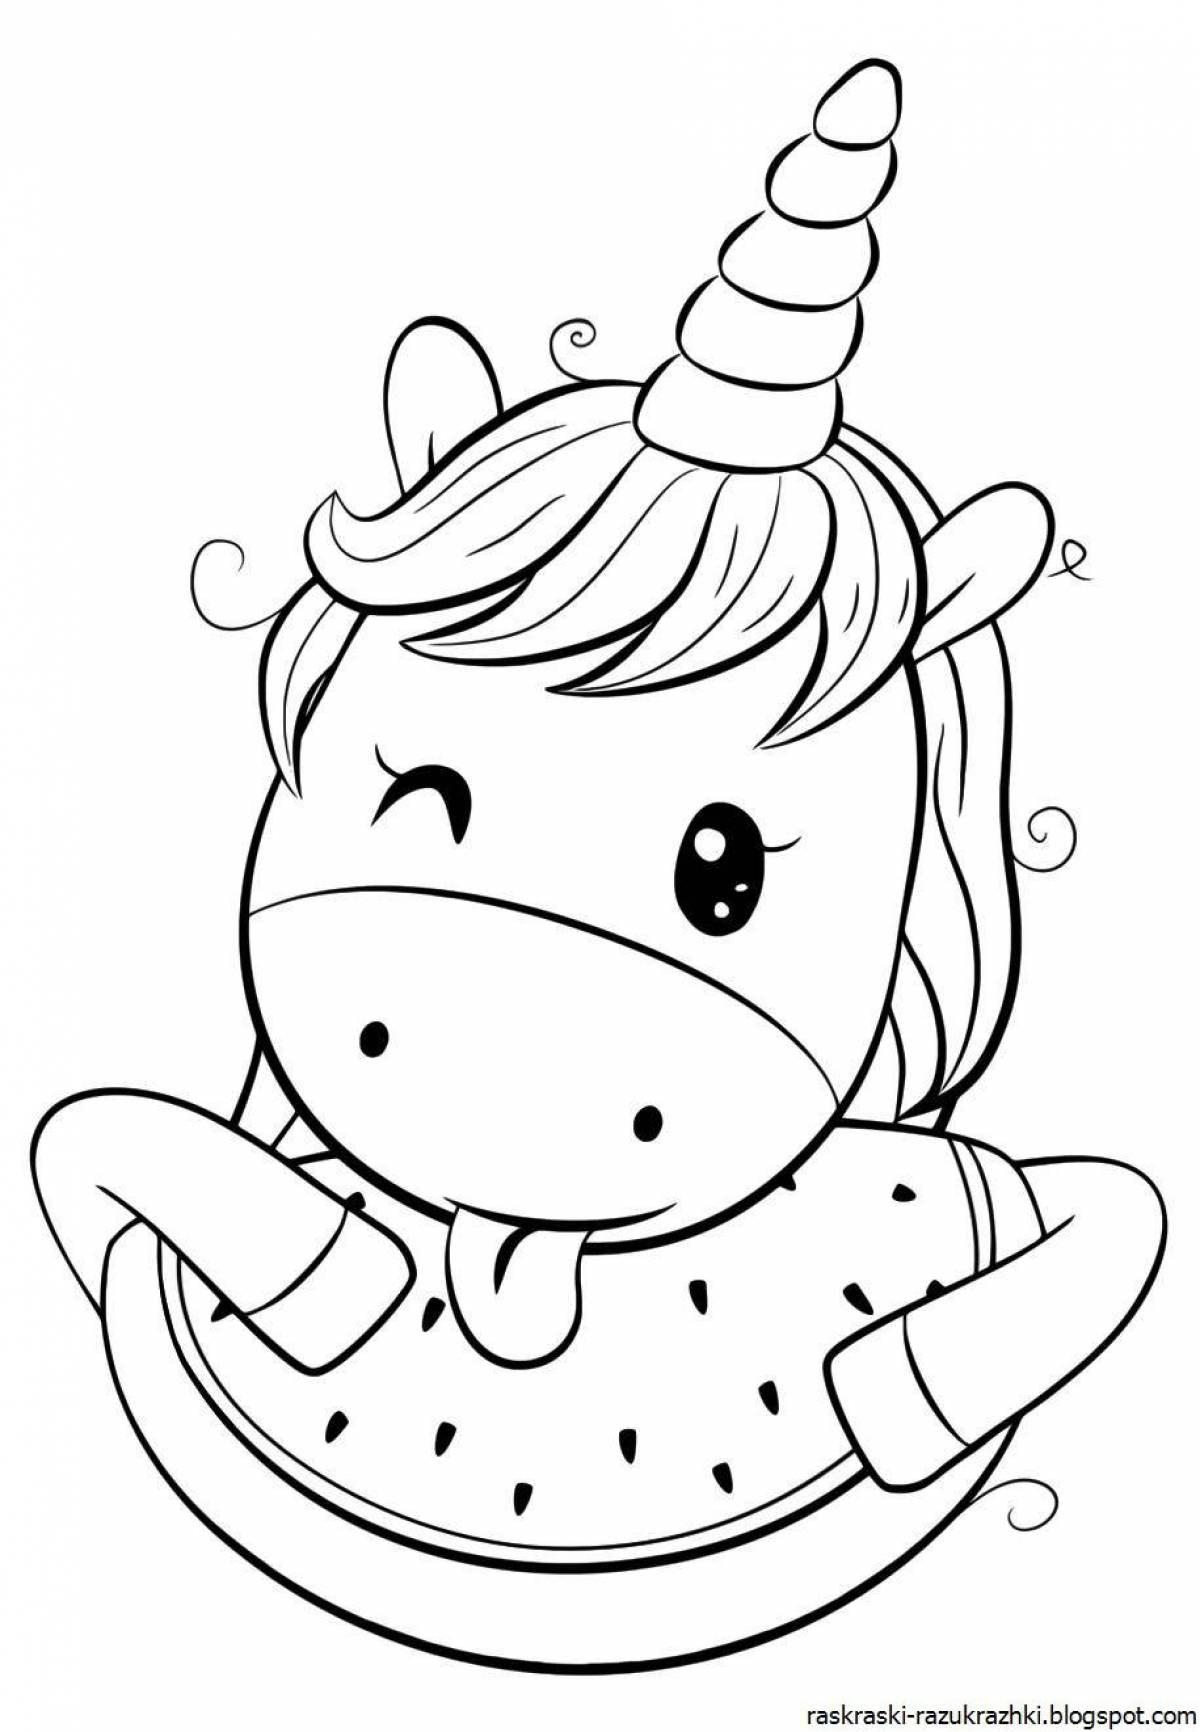 Charming unicorn coloring book for kids 6-7 years old